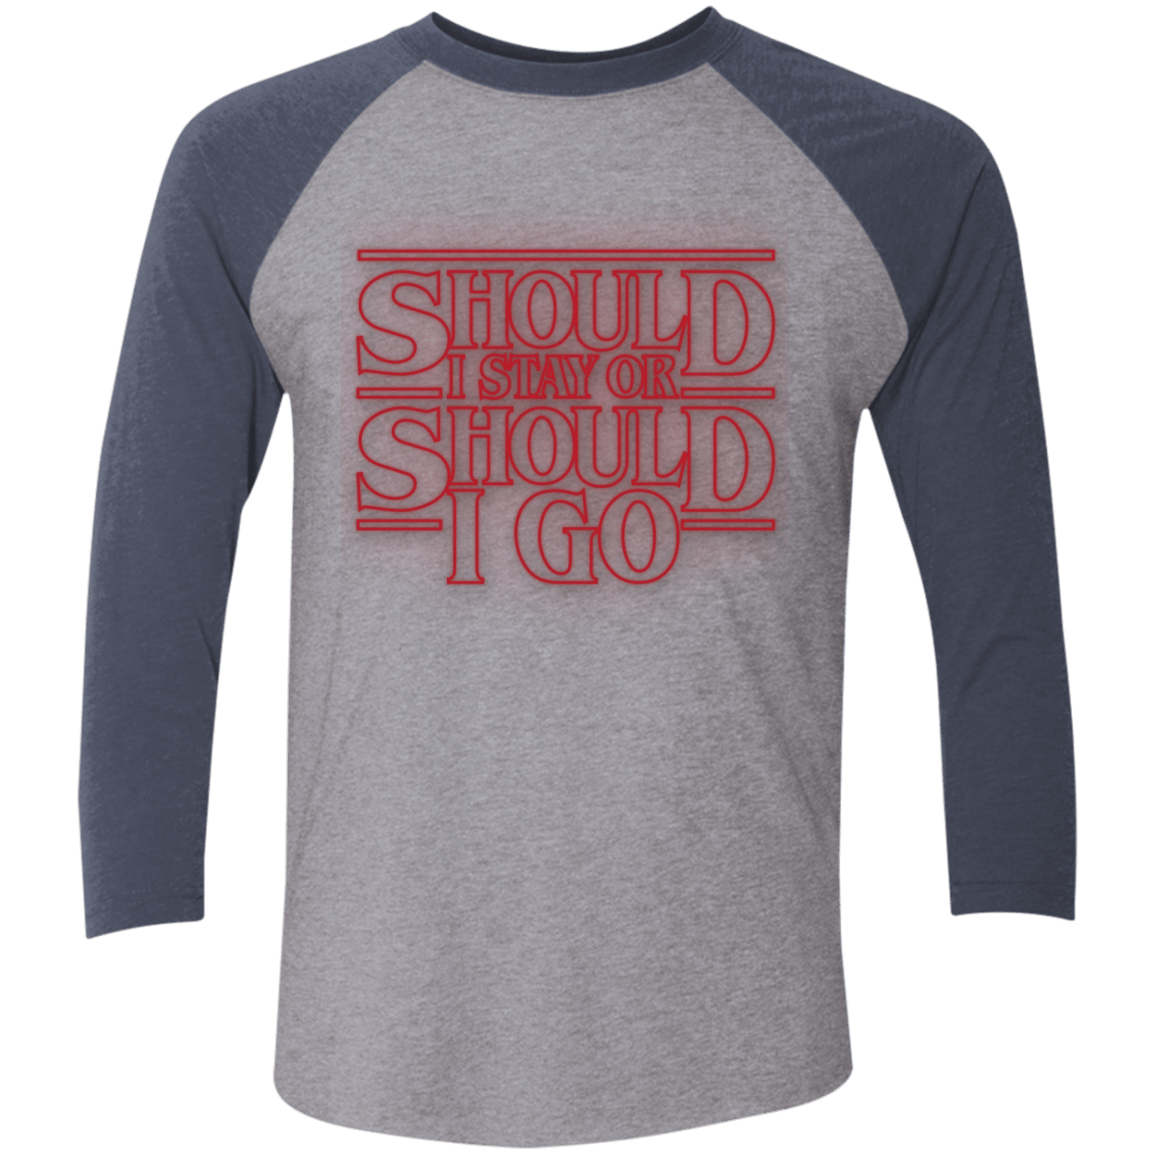 T-Shirts Premium Heather/ Vintage Navy / X-Small Should I Stay Or Should I Go Triblend 3/4 Sleeve